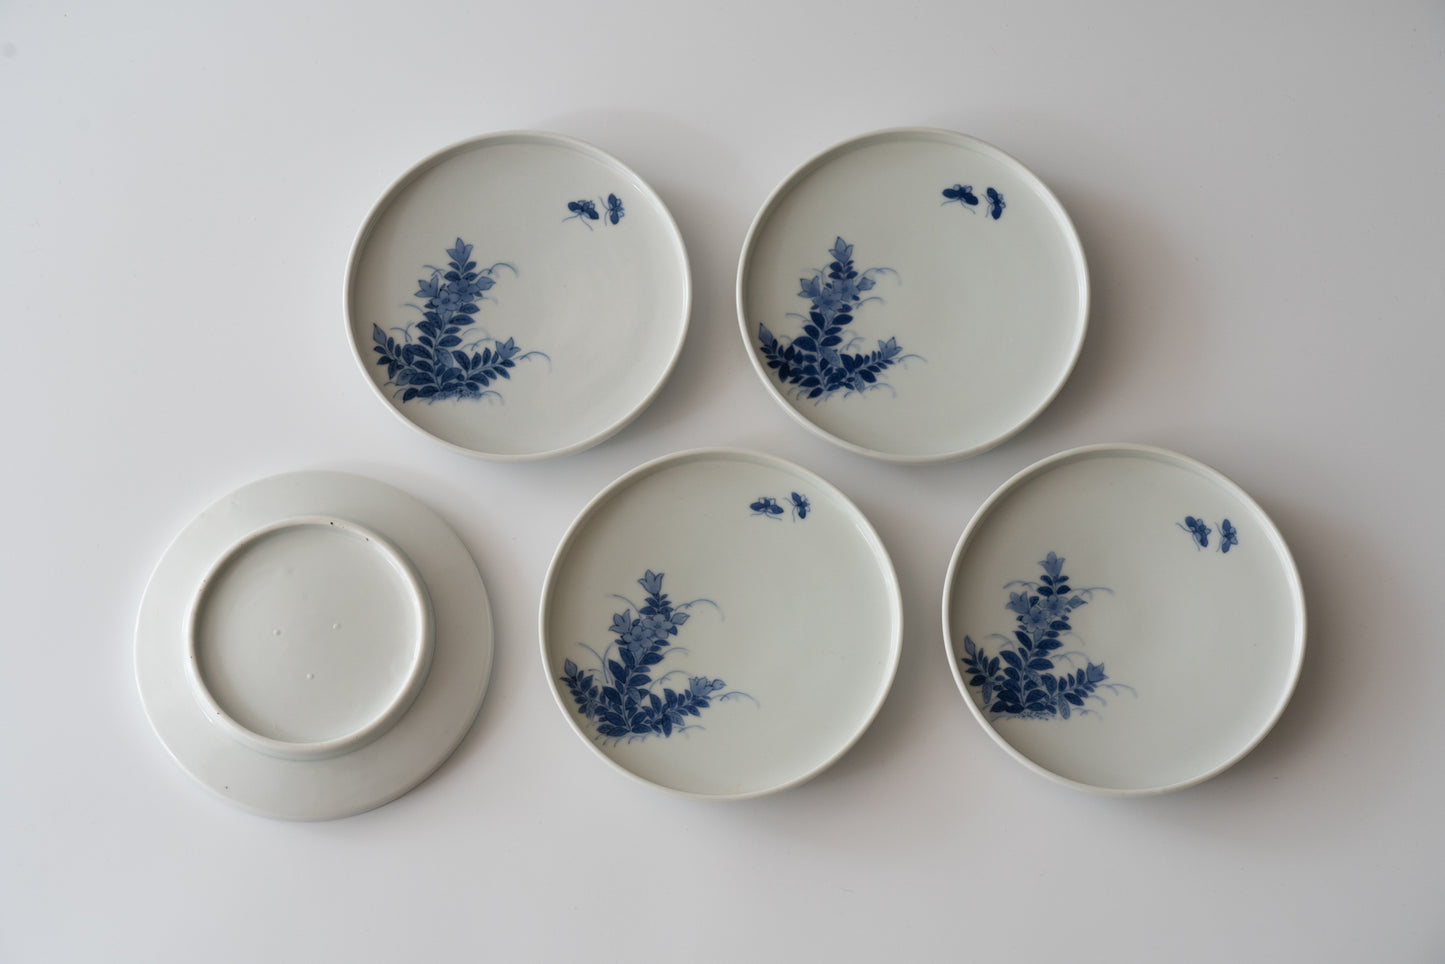 Dish with chinese bellflower and butterfly design, Imari ware in Kakiemon style